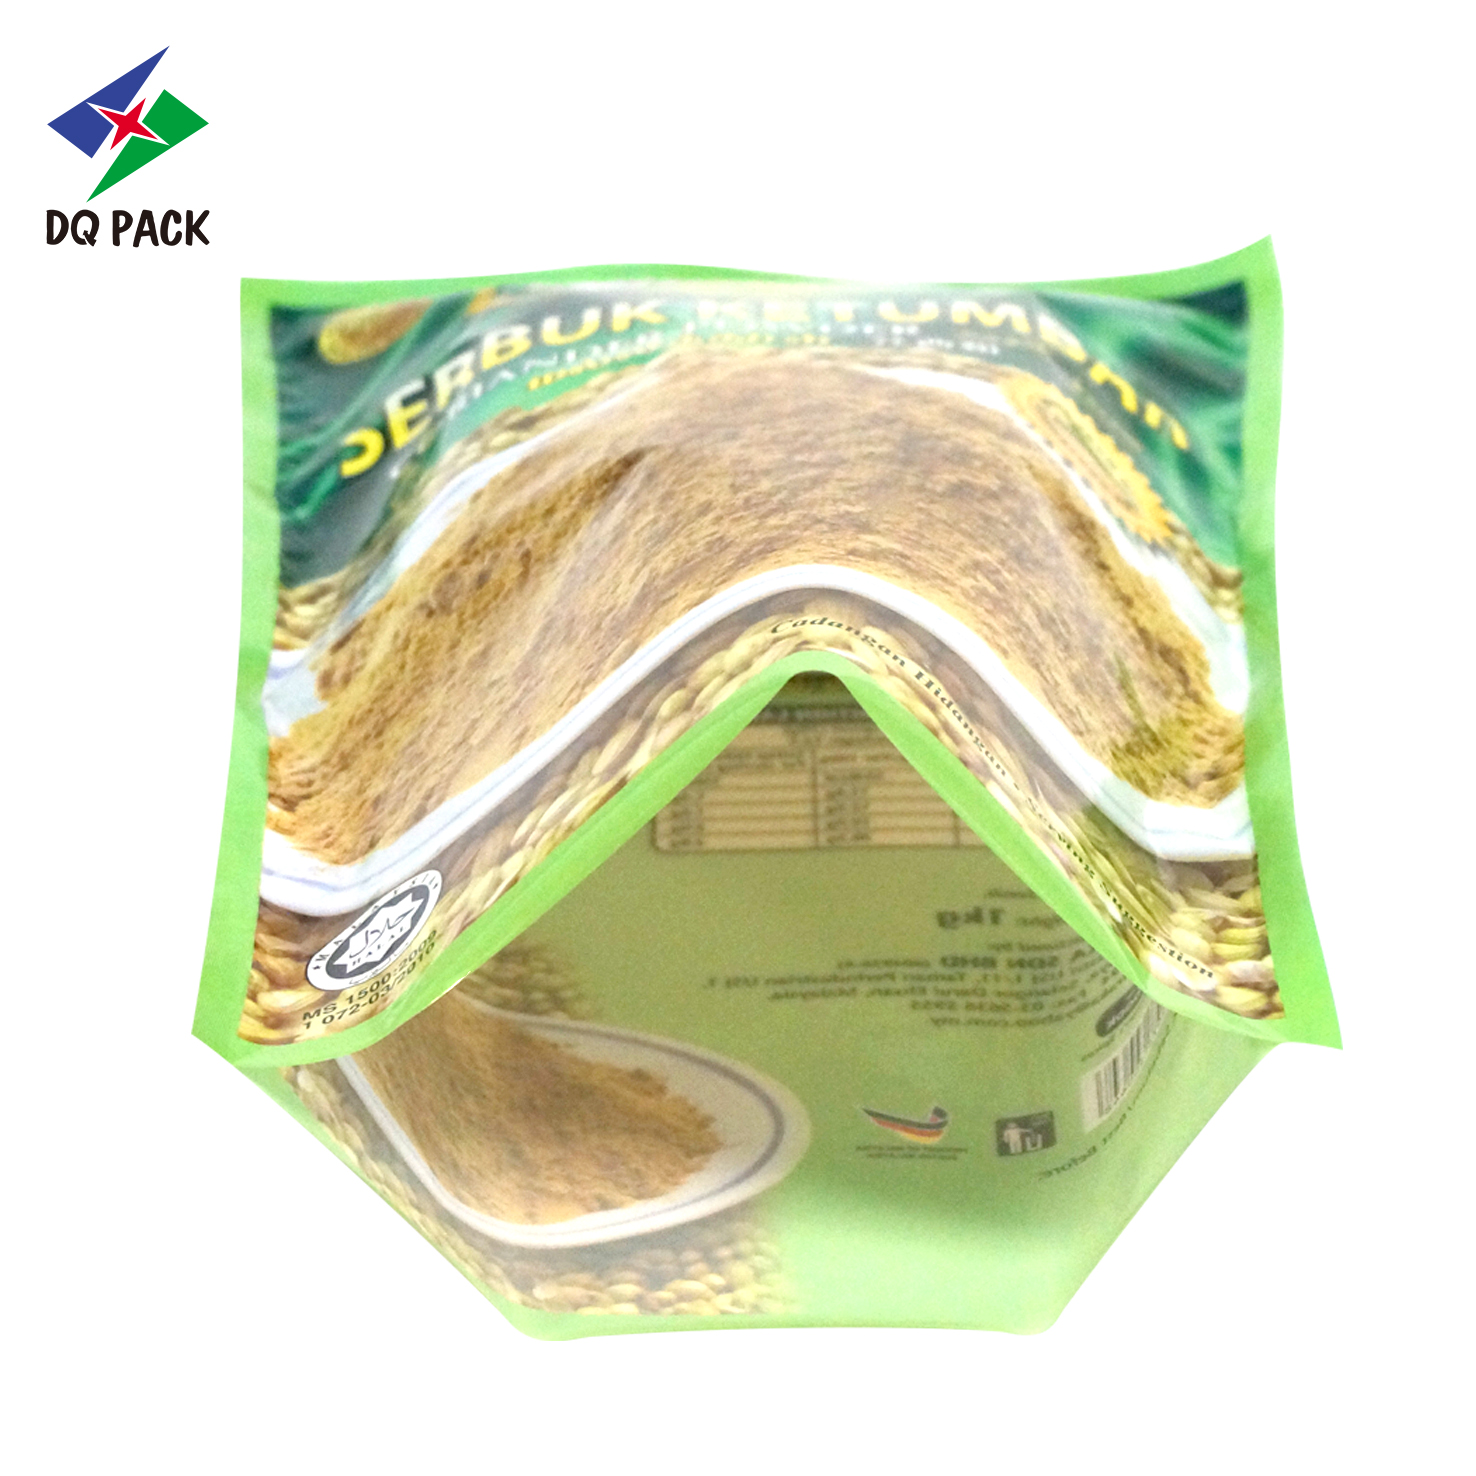 DQ PACK High Quality Plastic Three Side Seal Bag 1KG Heat Seal Sauce Packaging Bag